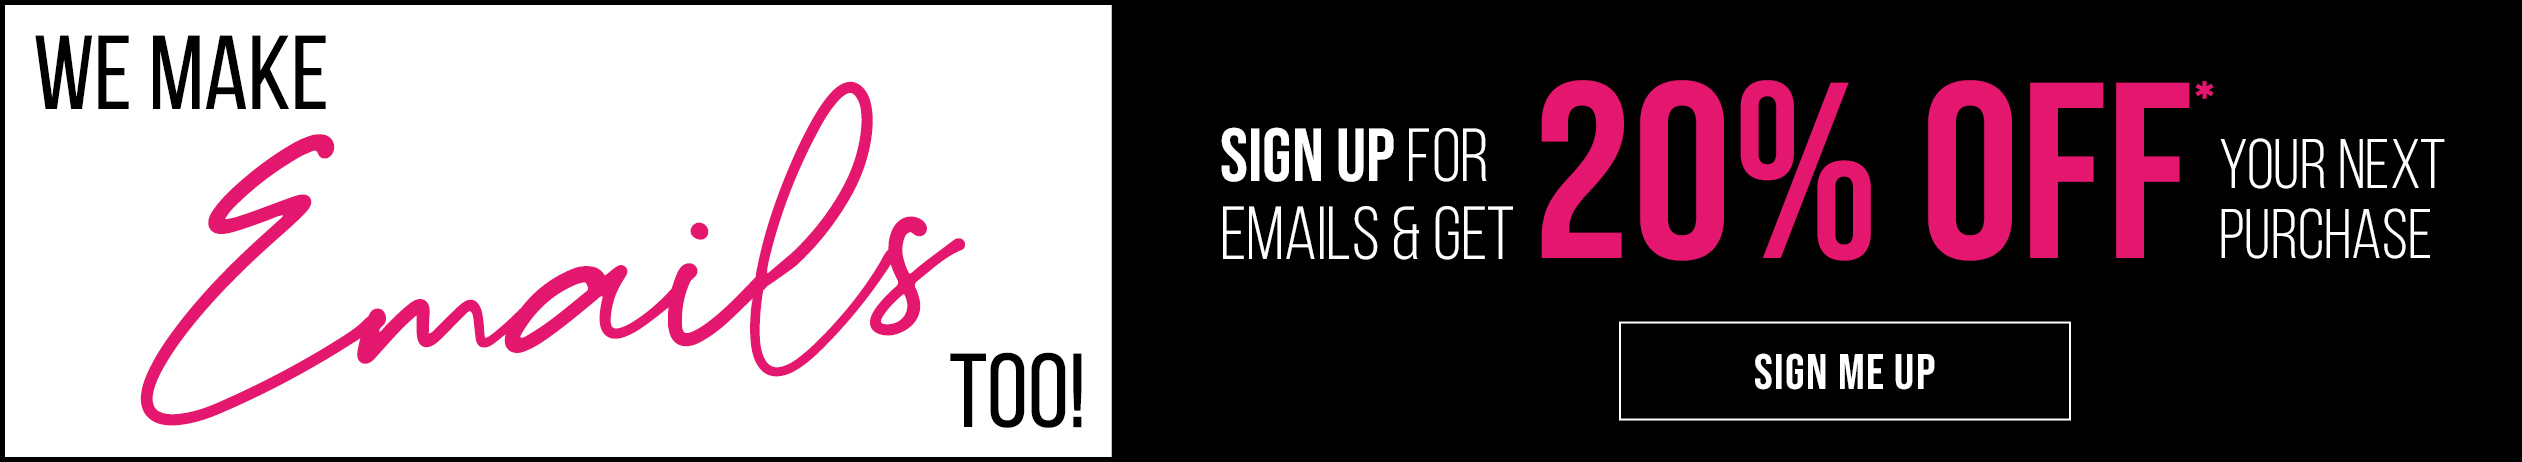 We make Emails too! Sign up for emails & get 20% off* your next purchase. Sign me up